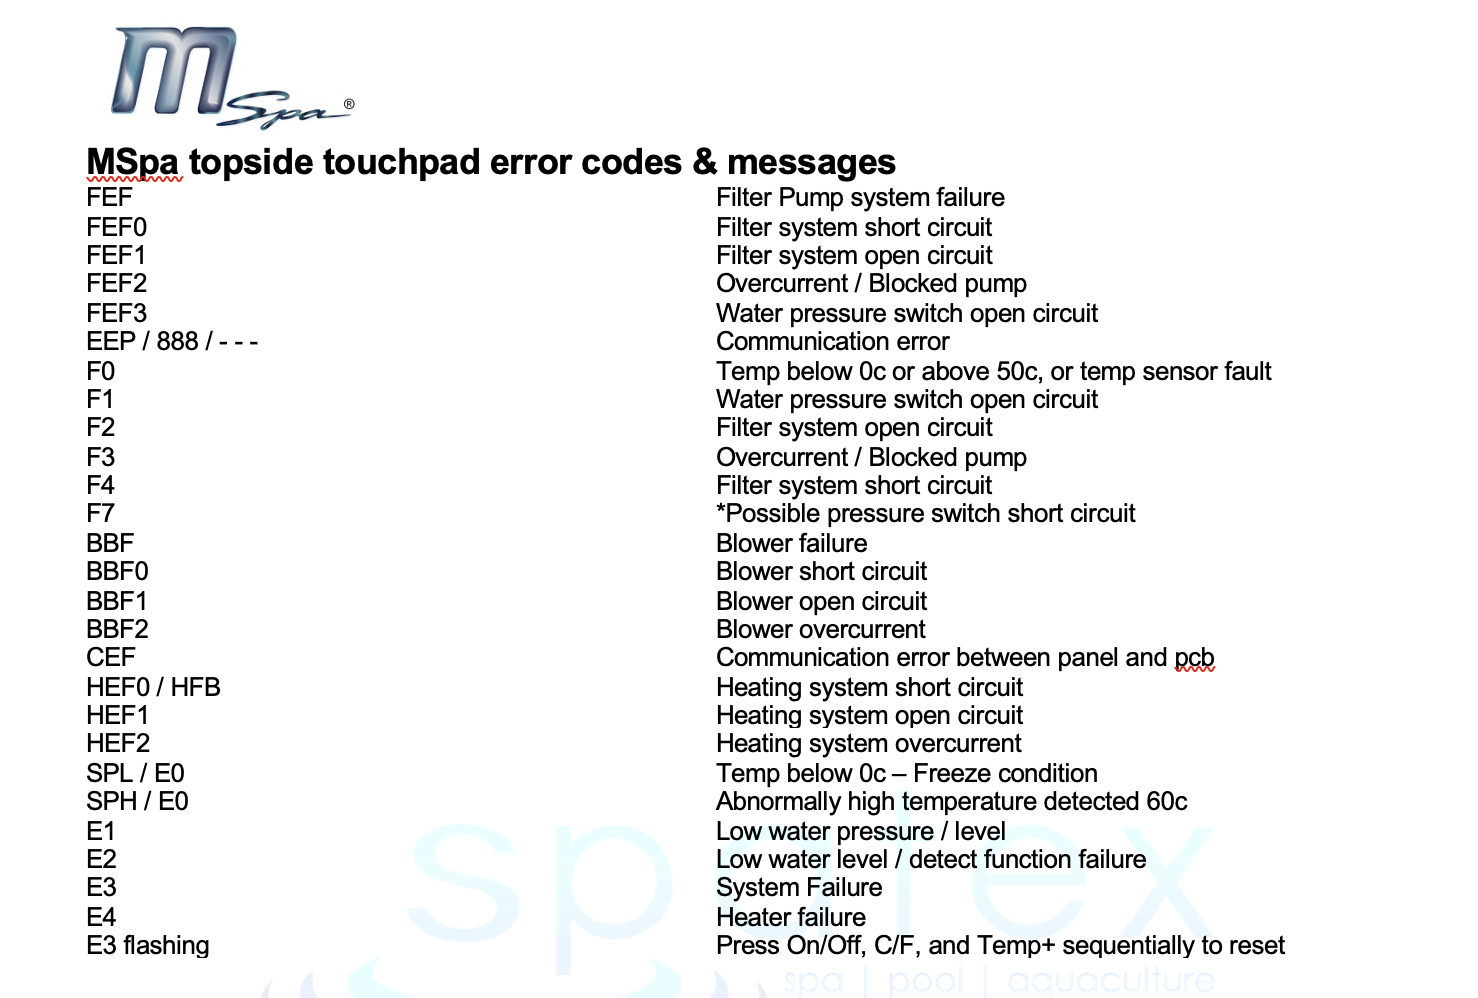 Mspa topside touchpad fault codes